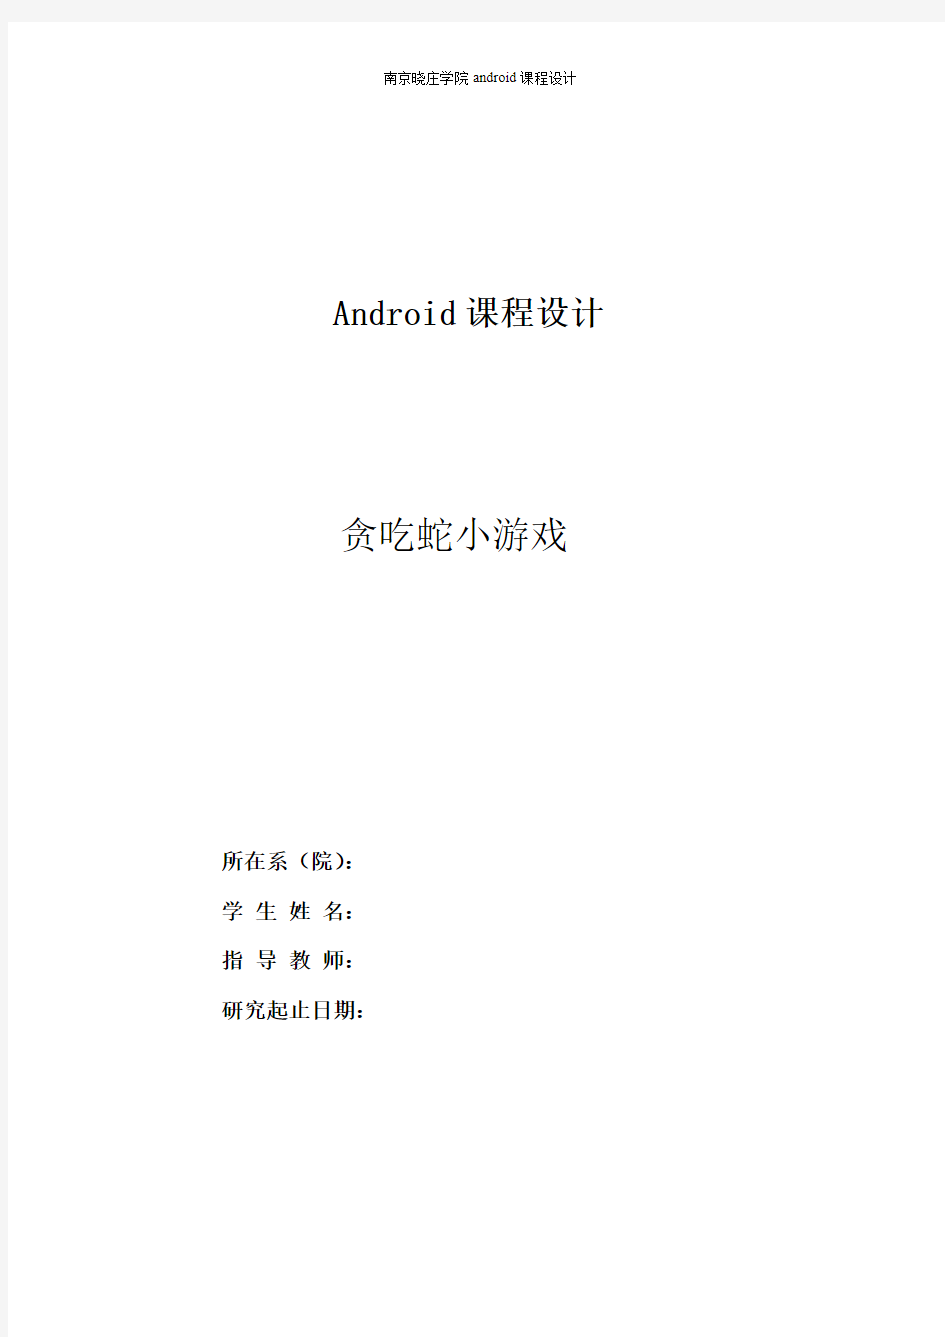 android报告